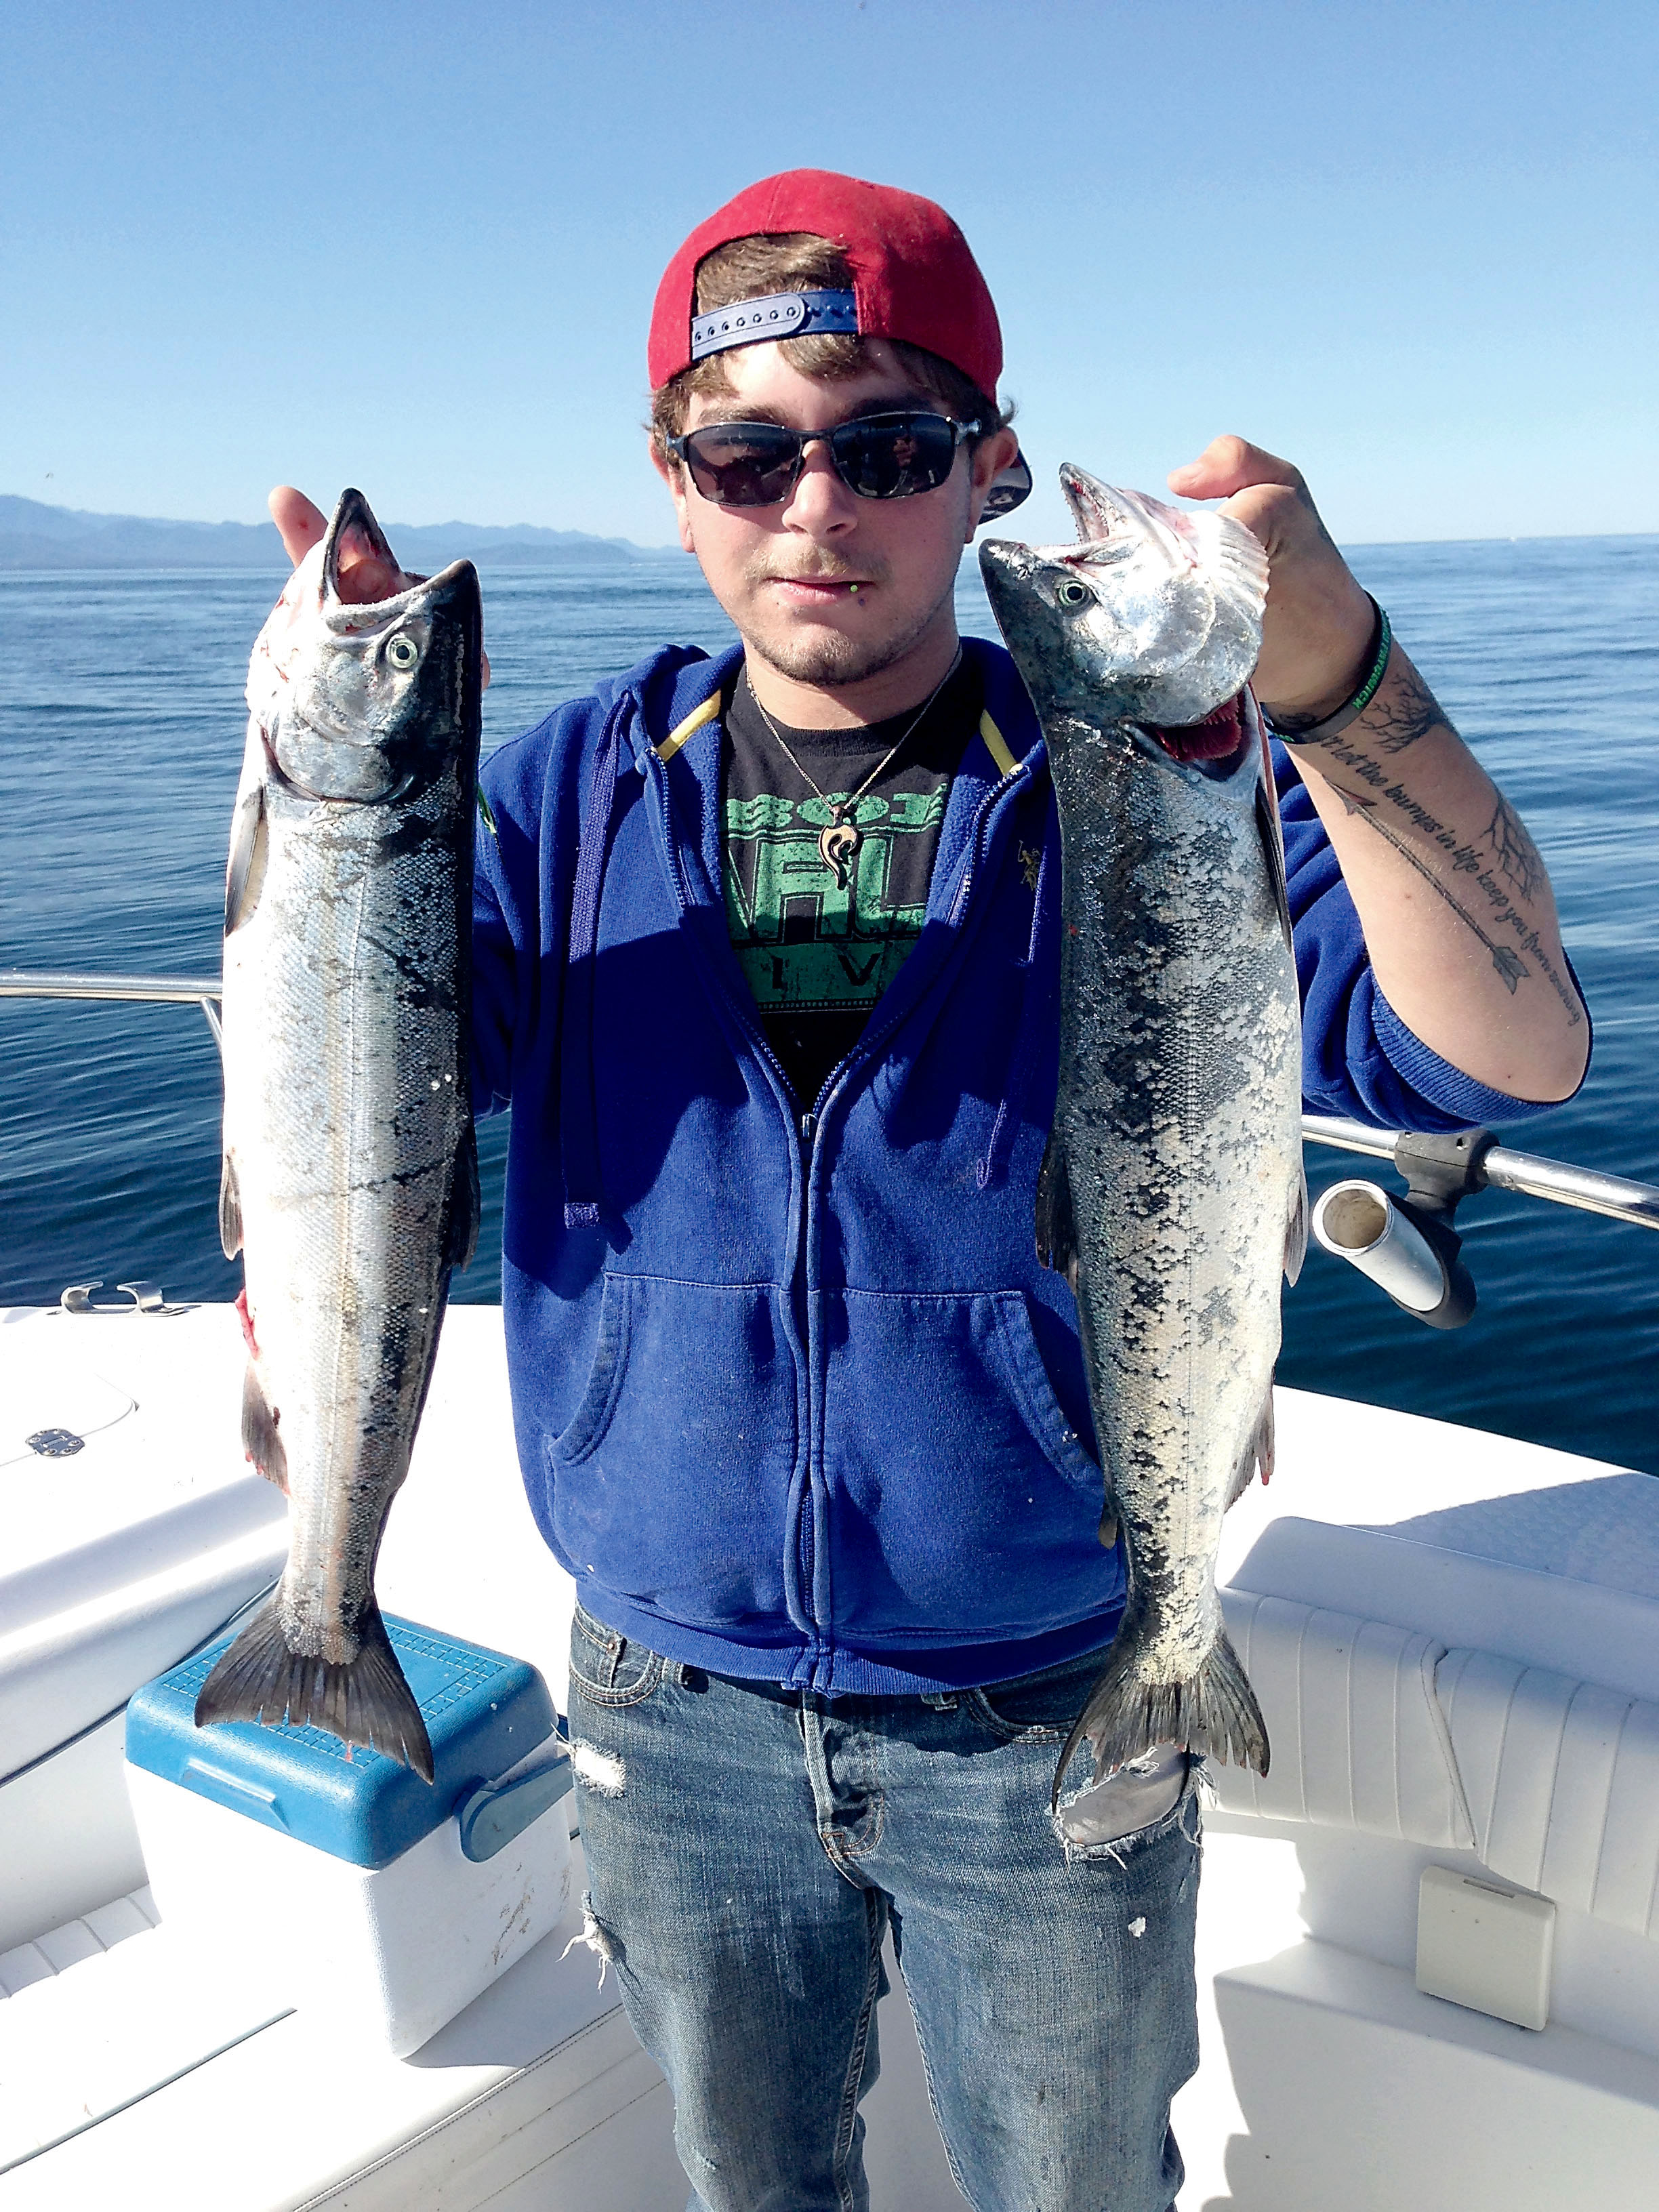 Grant Ogle of Port Angeles caught these coho